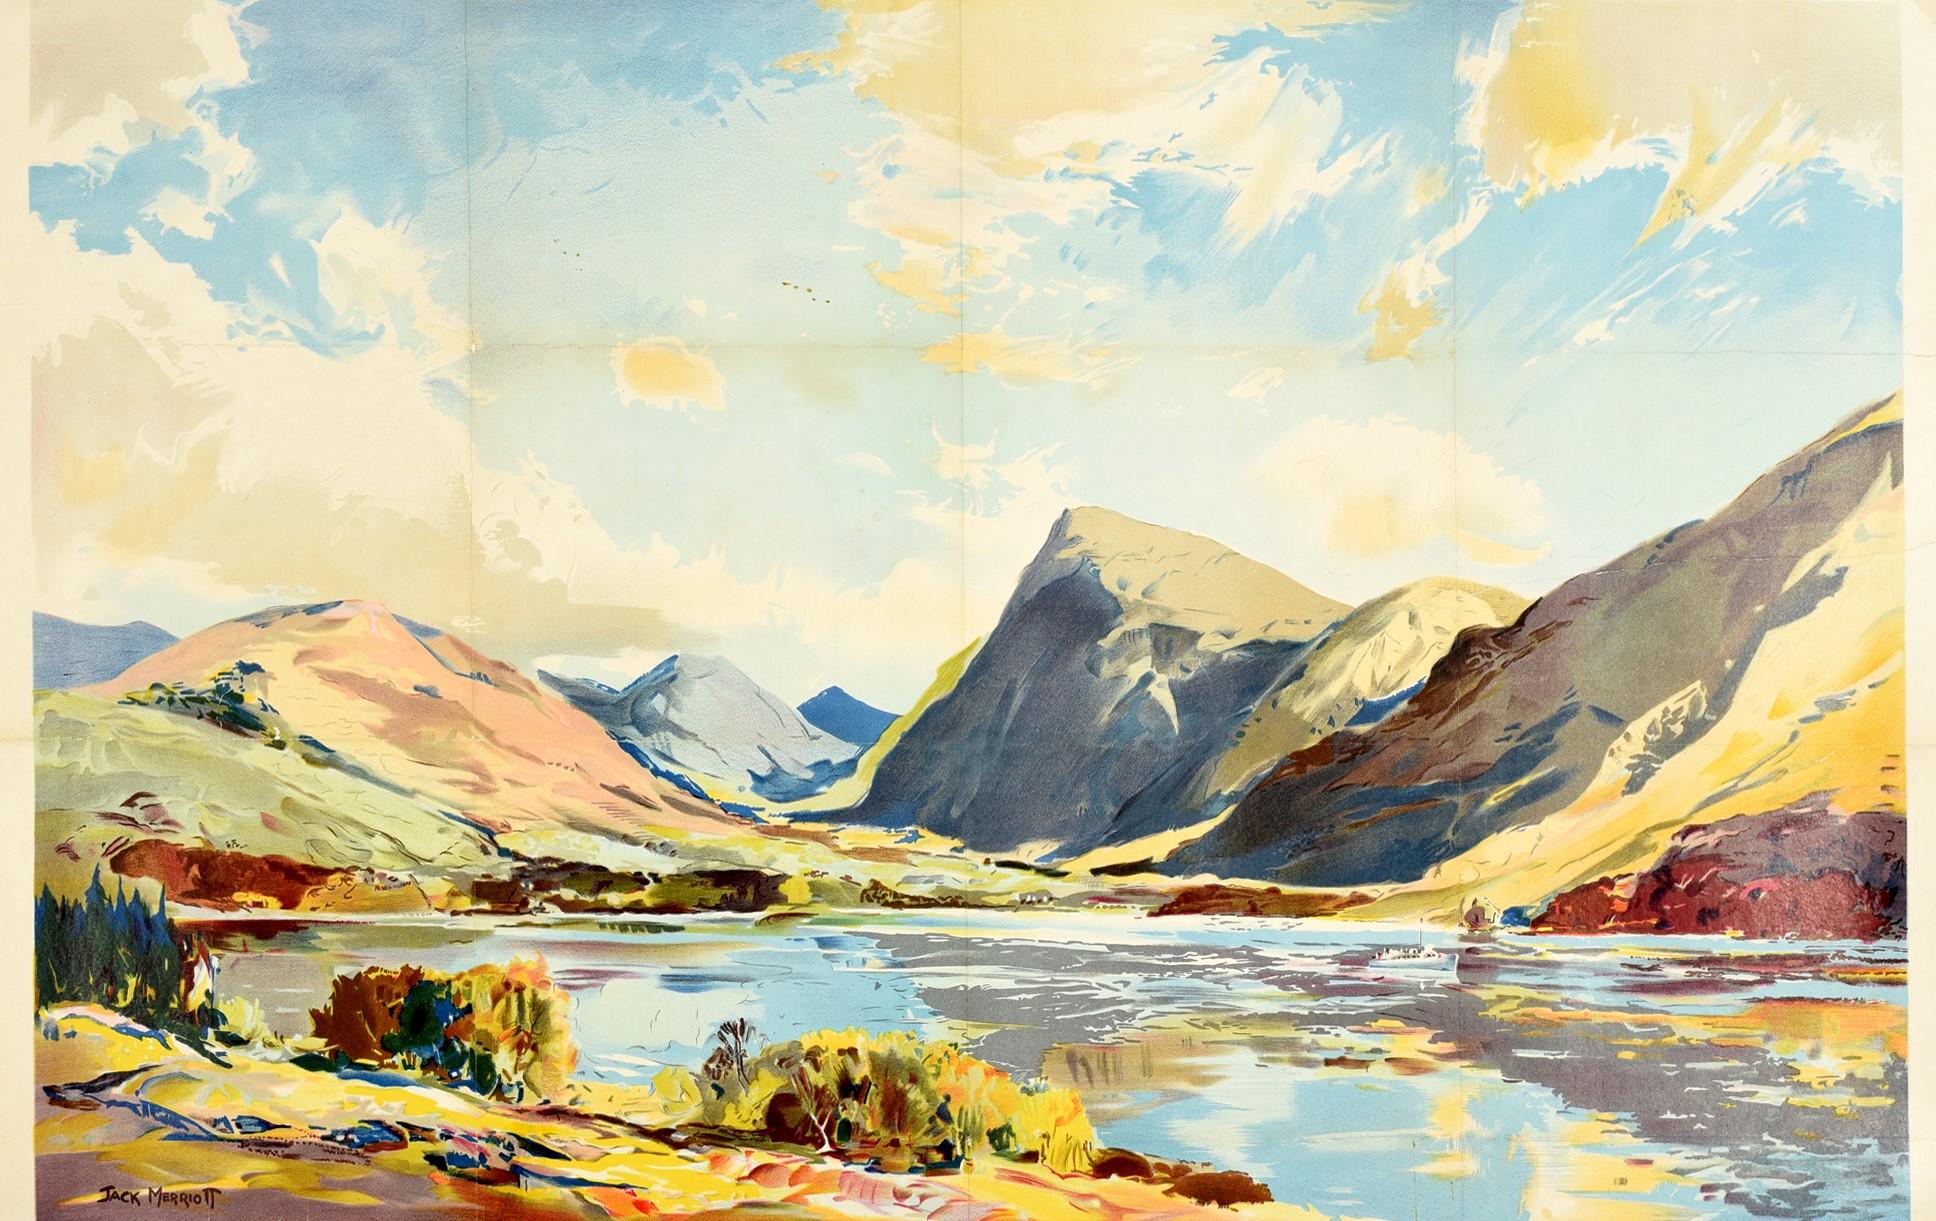 Original vintage British Railways travel poster for Loch Etive Western Highlands on the route of the Glencoe Glen Etive and Glen Etive Circular Tour featuring a painting by the British artist Jack Merriott (1901-1968) depicting a scenic view of the